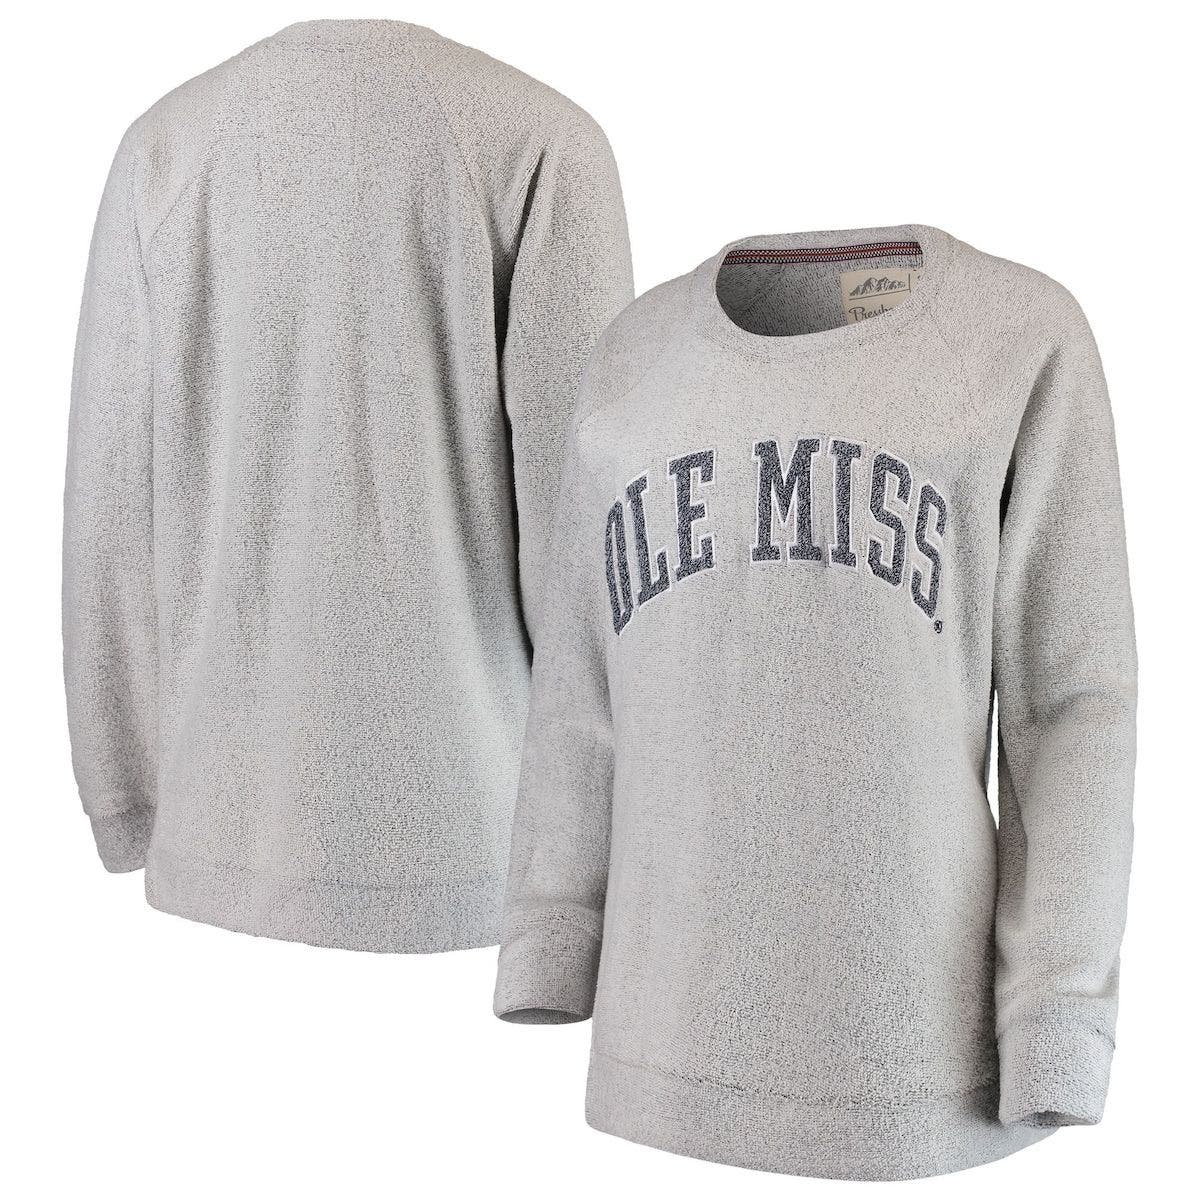 OLE MISS REBELS ADULT NAVY EMBROIDERED CREW SWEATSHIRT NEW